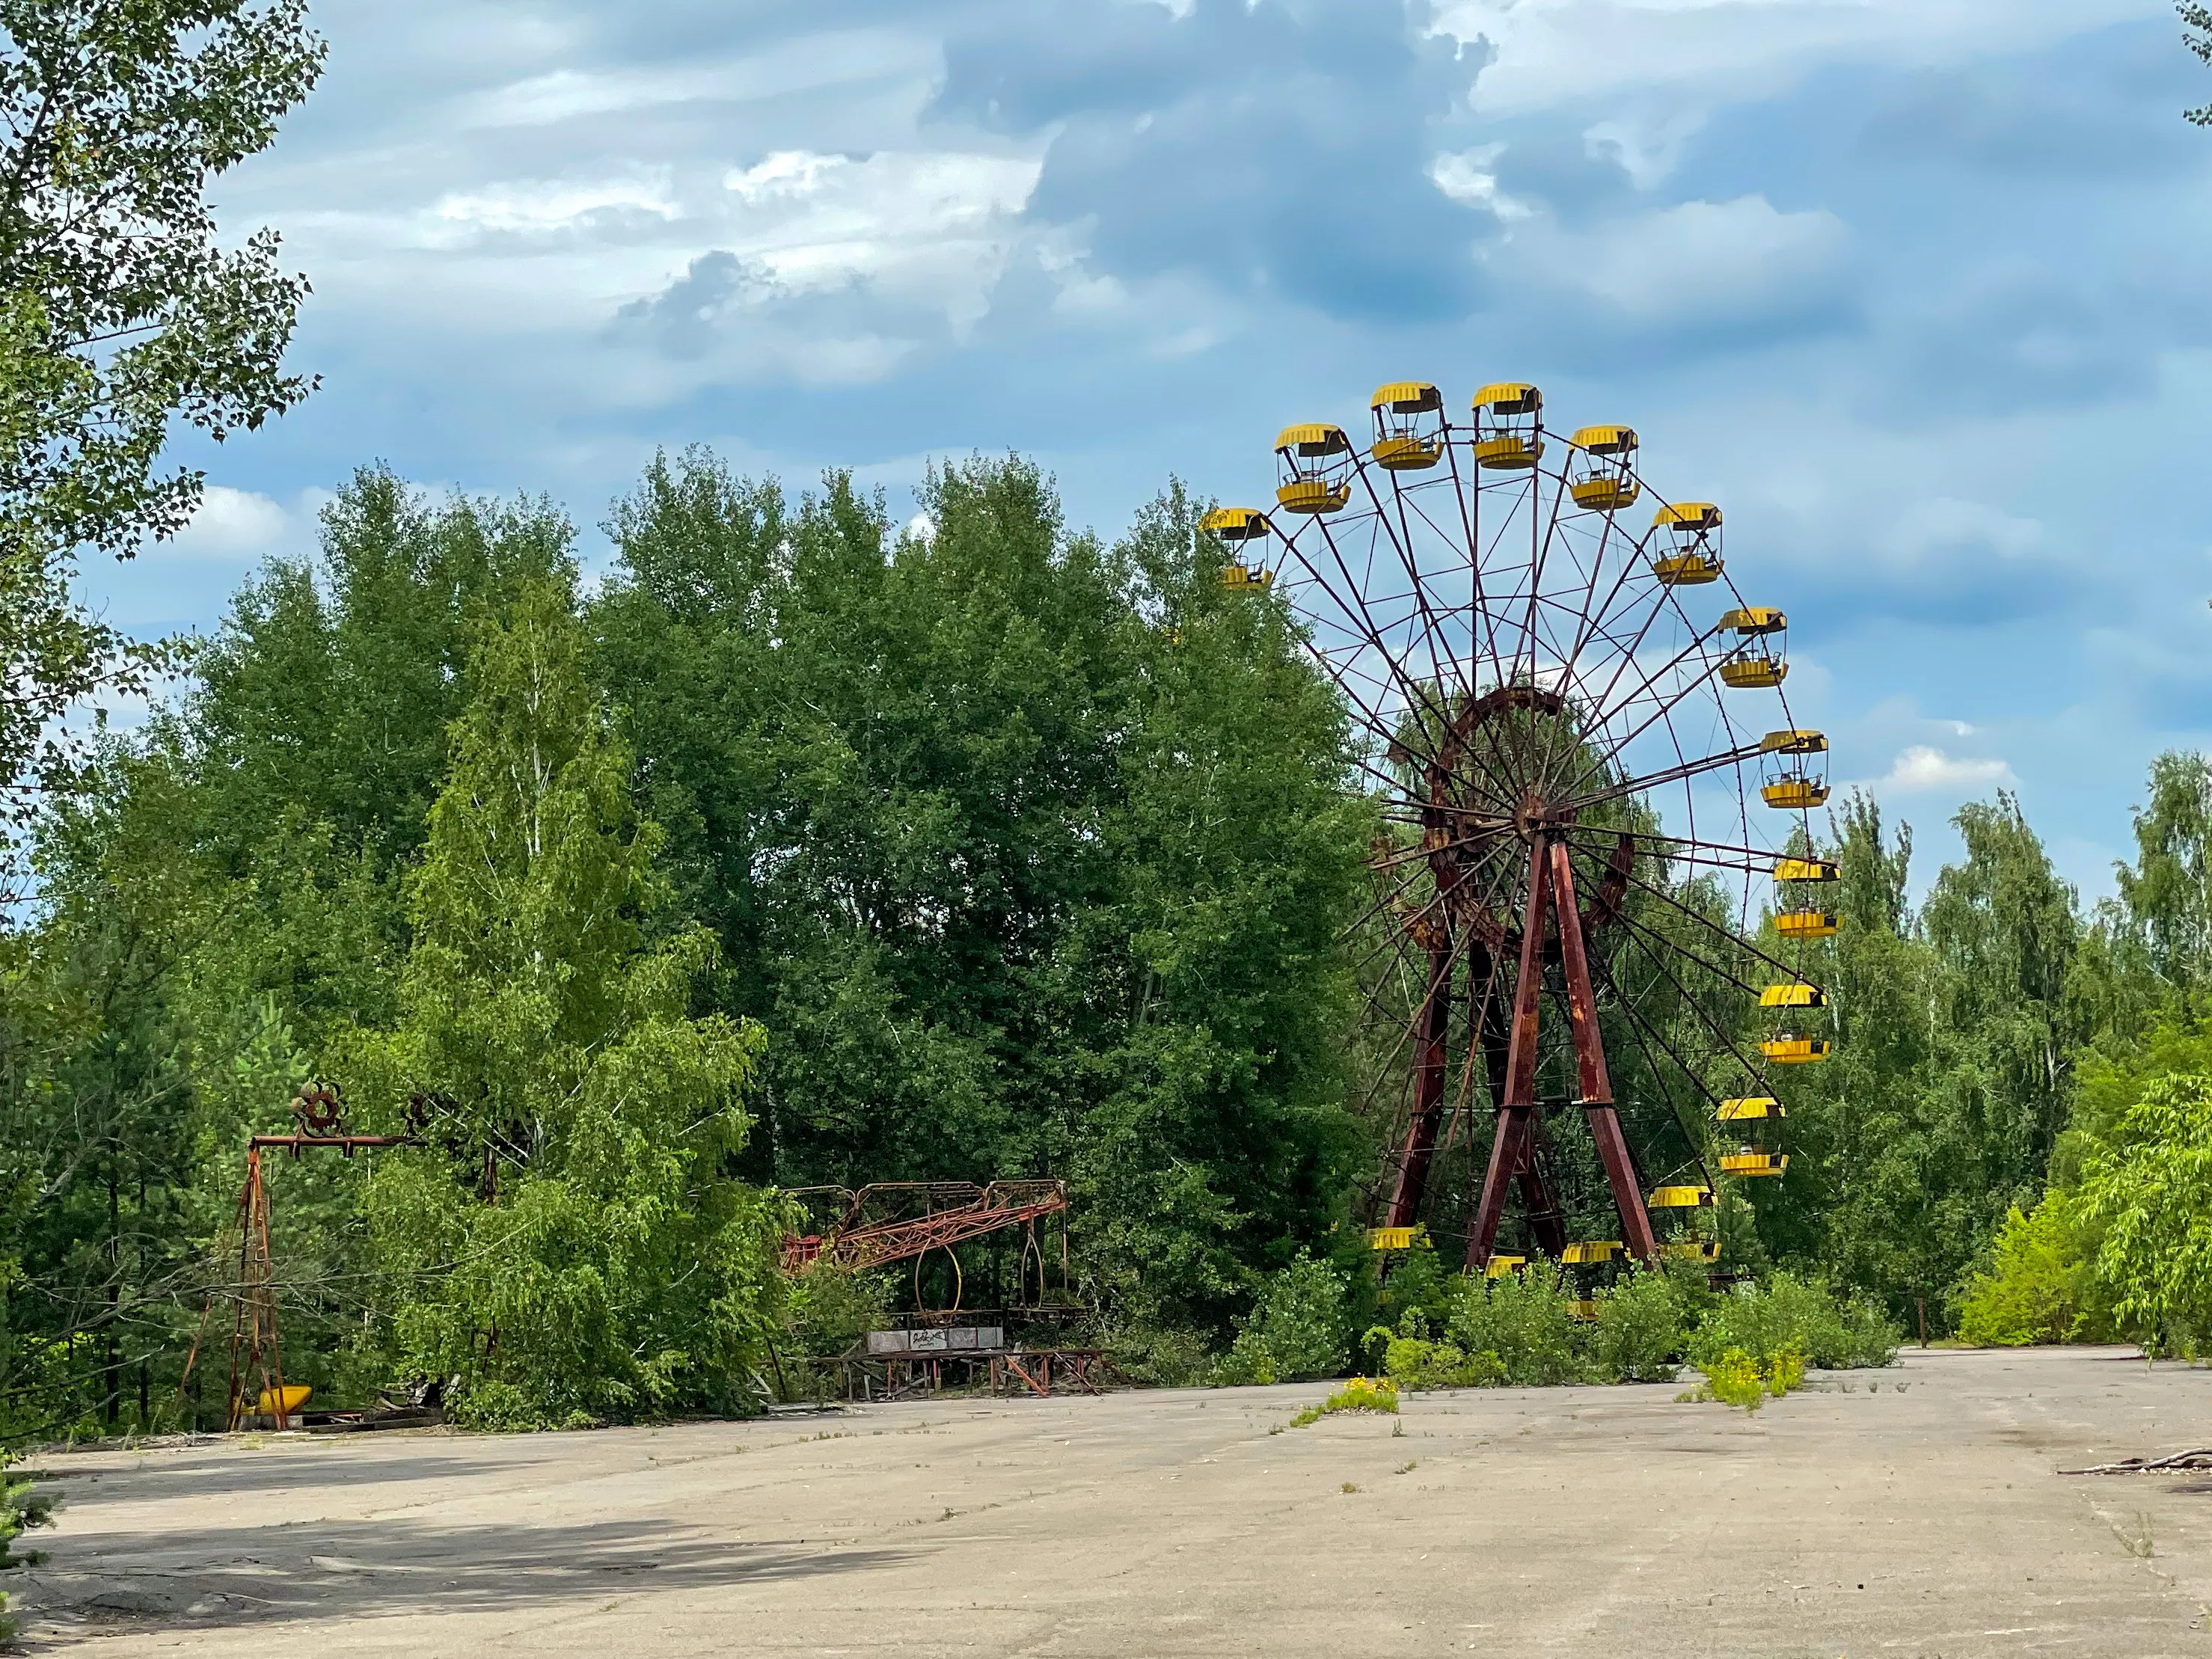 A day in the exclusion zone: Chernobyl and Pripyat